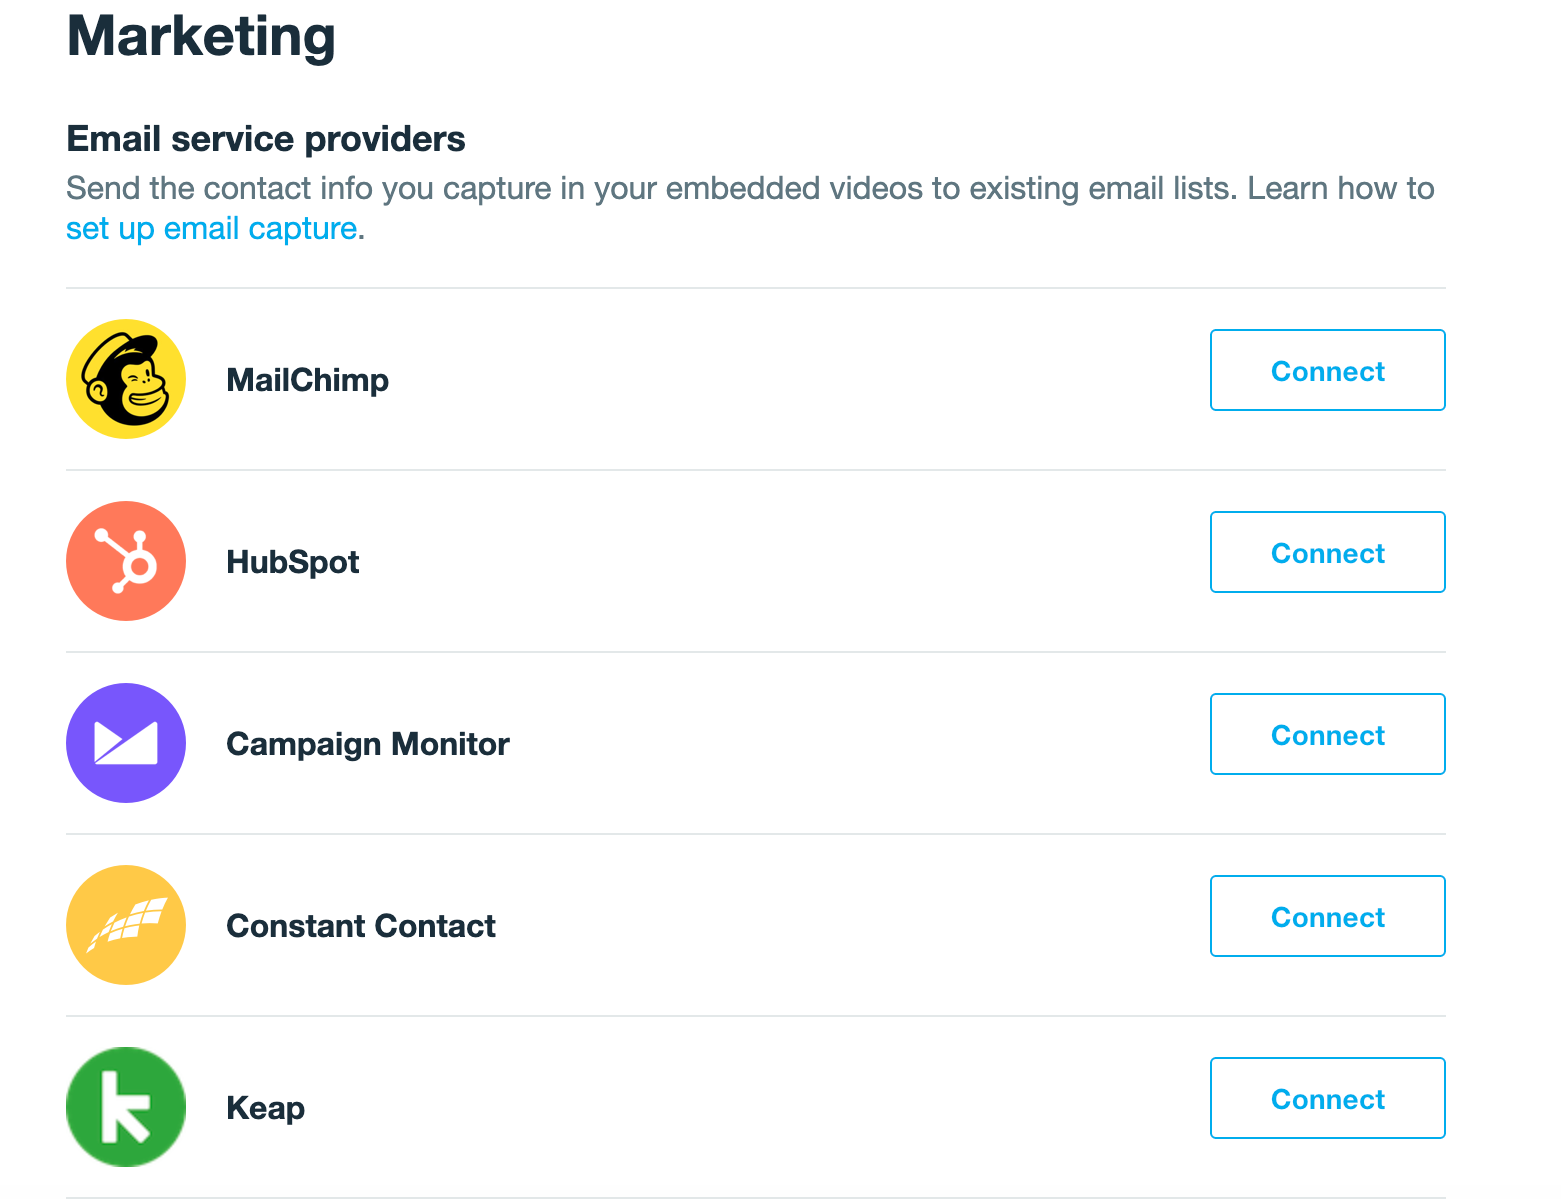 A screenshot showing various connected email serice provieders. This includes MailChimp, HubSpot, Campaign Monitor, Constant Contact, and Keap. Next to each icon and label of each provider, there is a 'Connect' button. This will connect your Vimeo account with your ESP.